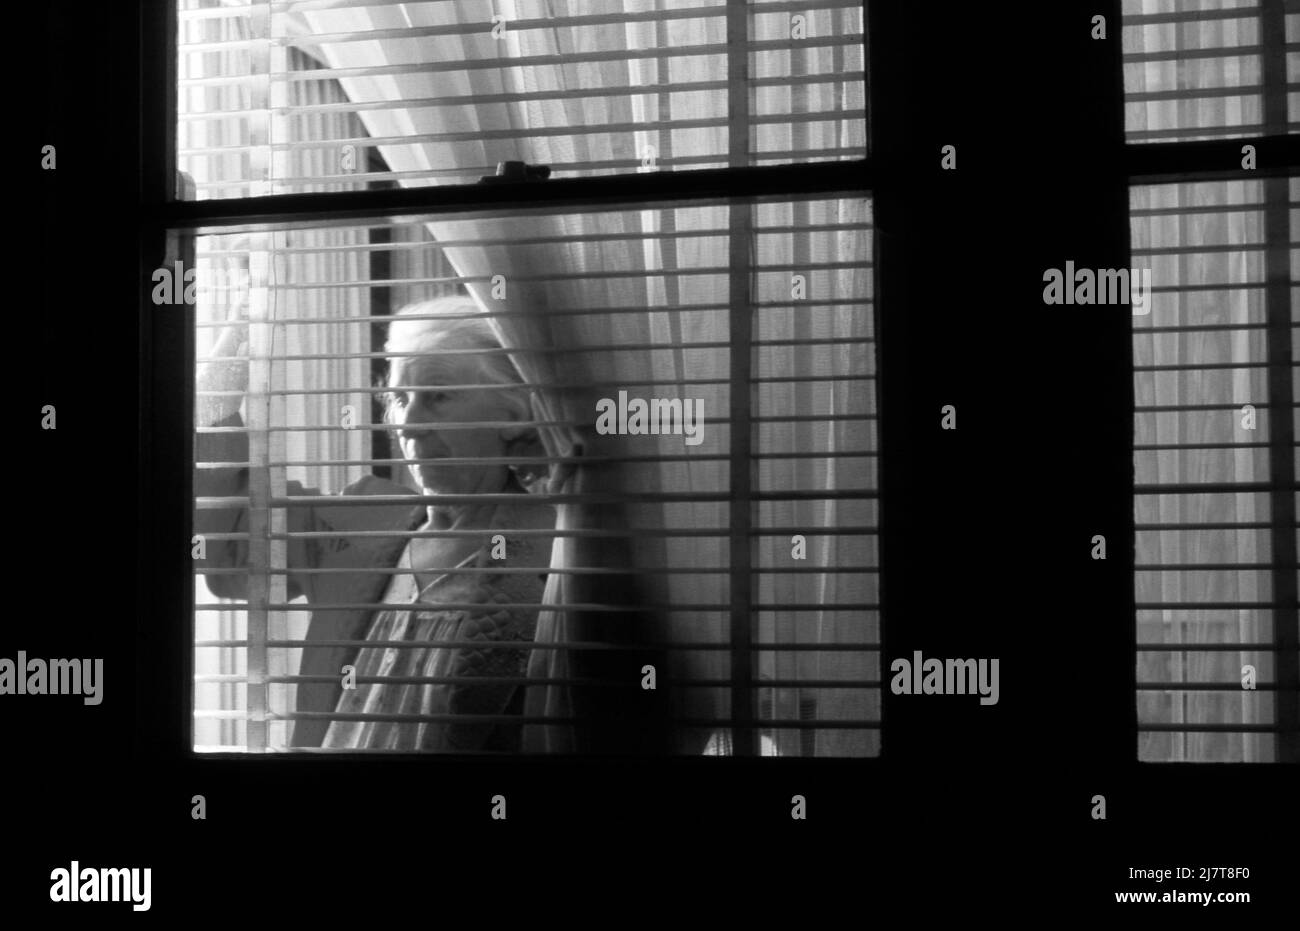 AN ELDERLY LADY STARES OUT INTO THE NIGHT THROUGH THE BLINDS OF HER HOUSE. Stock Photo